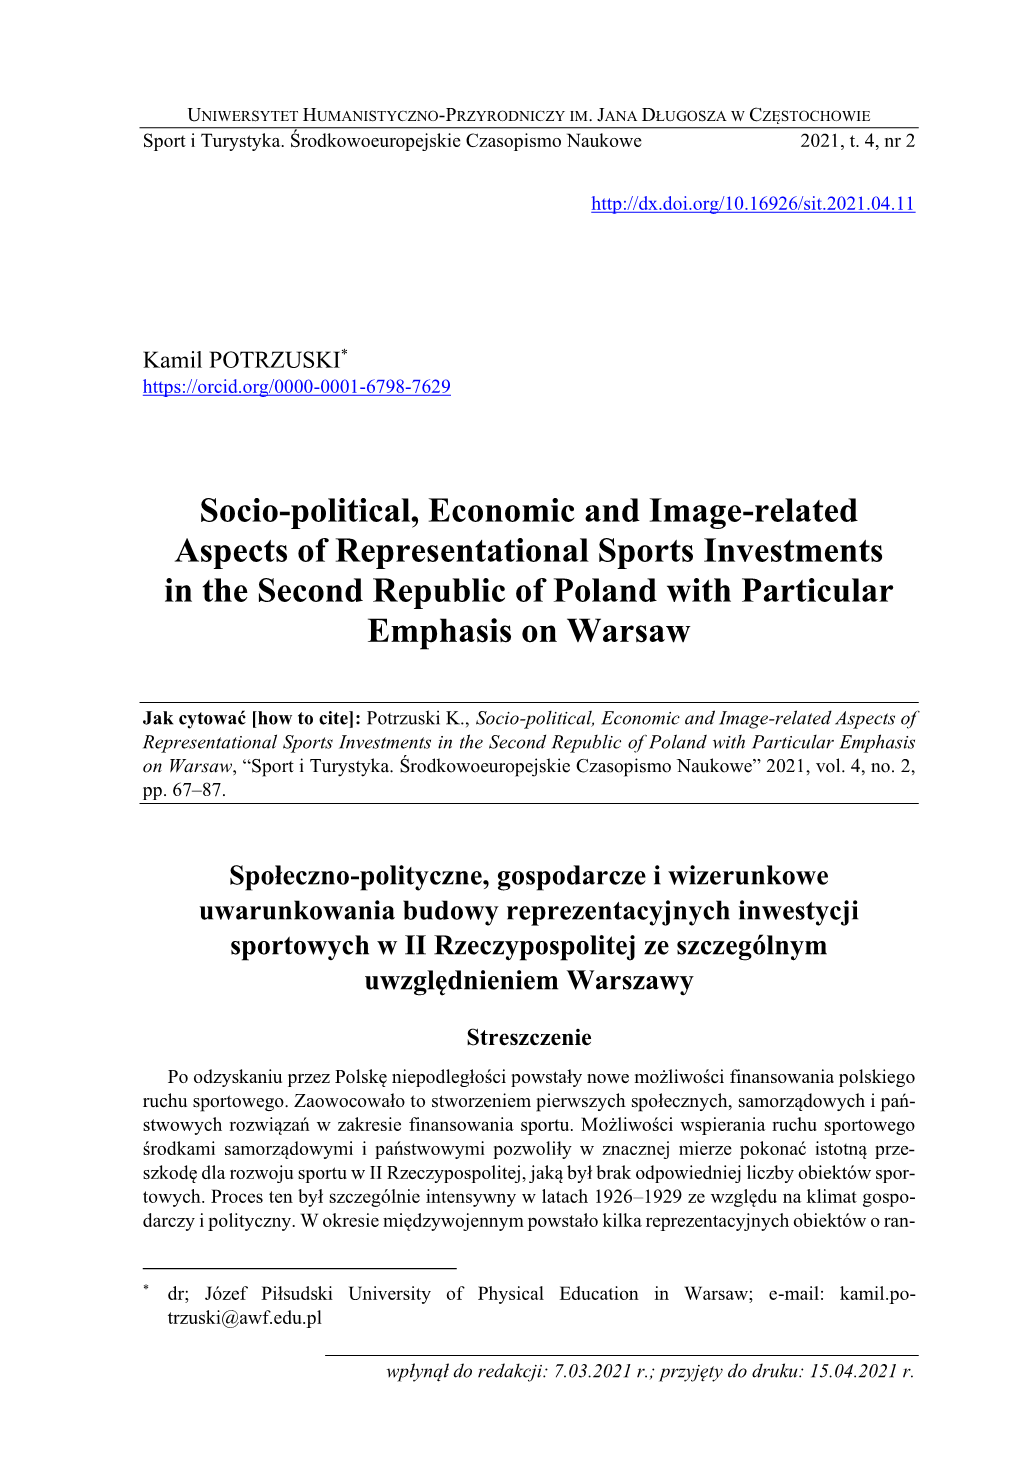 Socio-Political, Economic and Image-Related Aspects of Representational Sports Investments in the Second Republic of Poland with Particular Emphasis on Warsaw